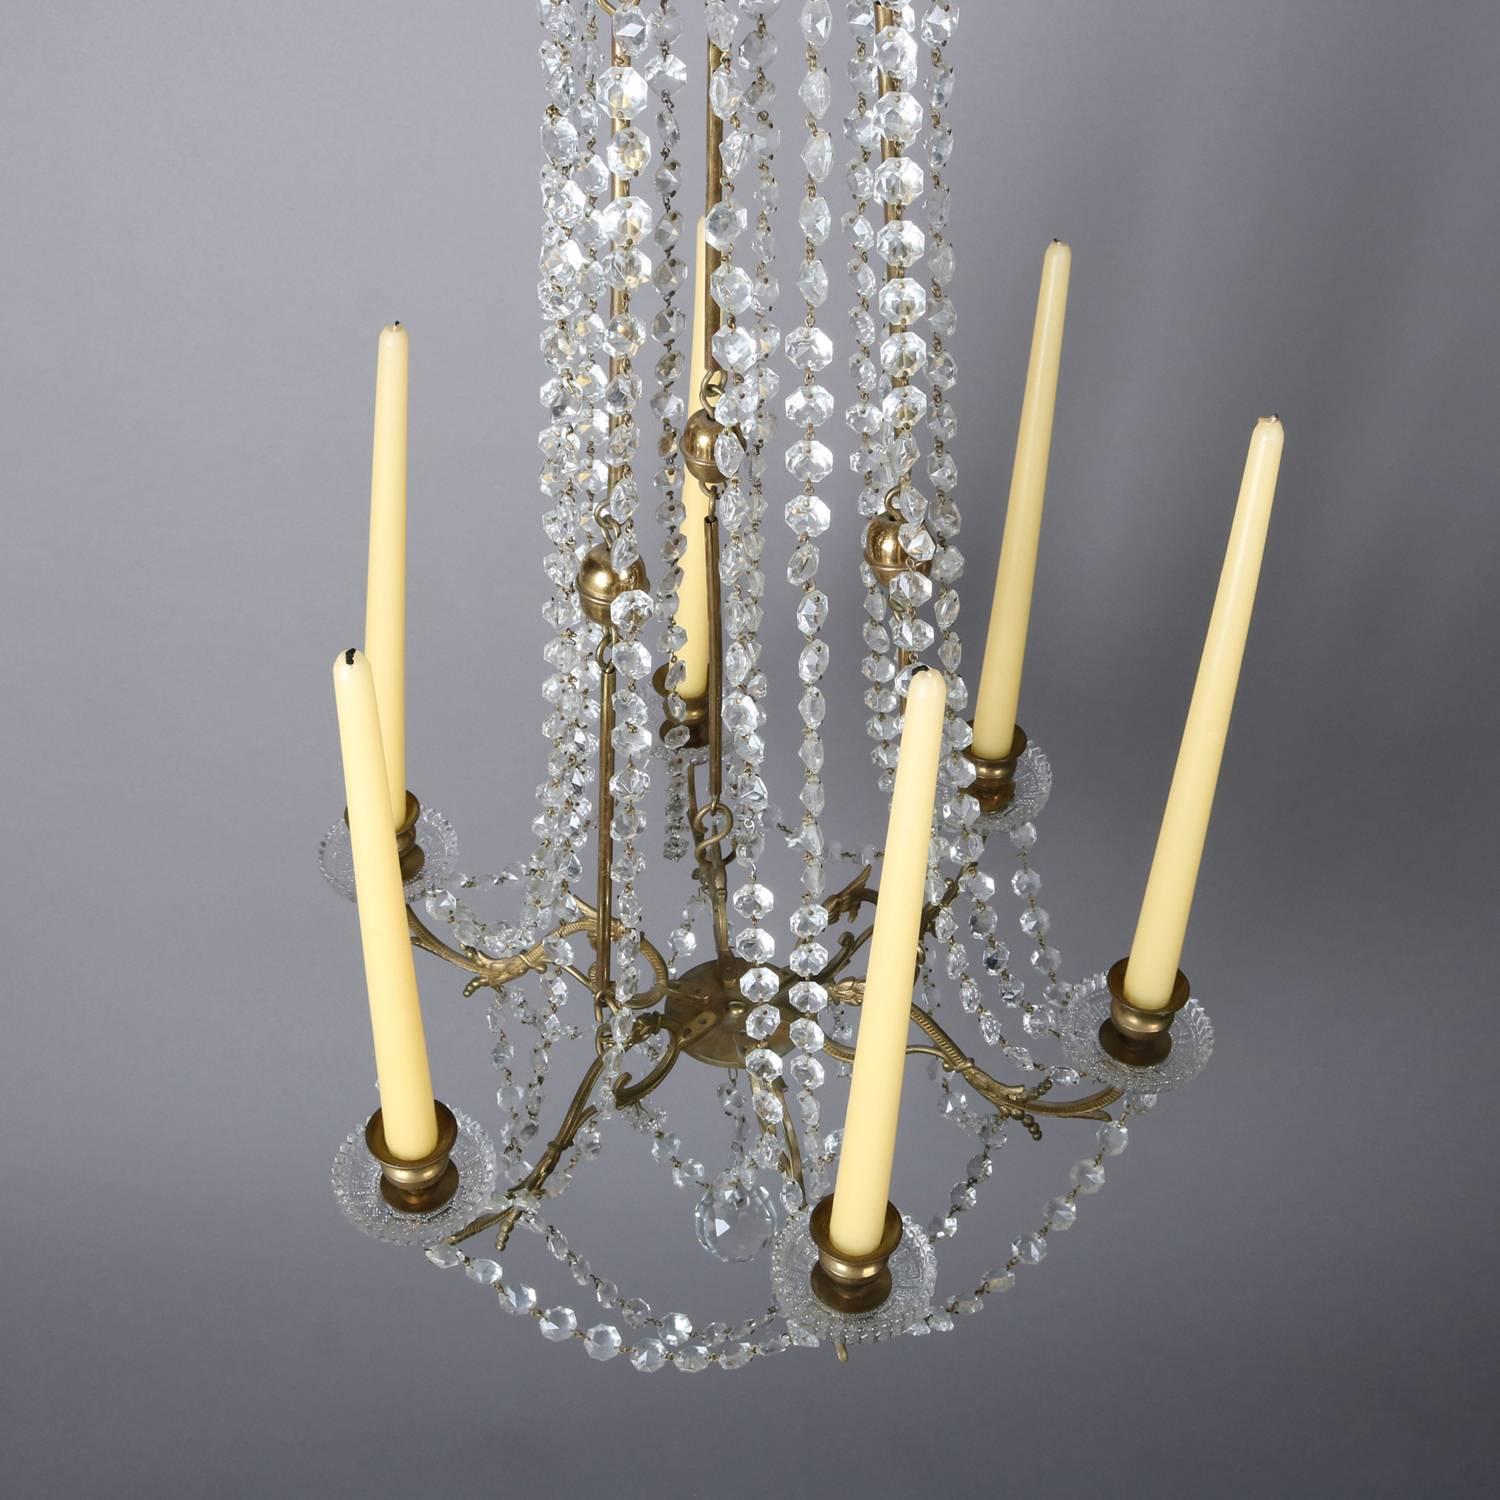 20th Century French Victorian Gilt and Cut Crystal Six-Light Draping Chandelier, circa 1900